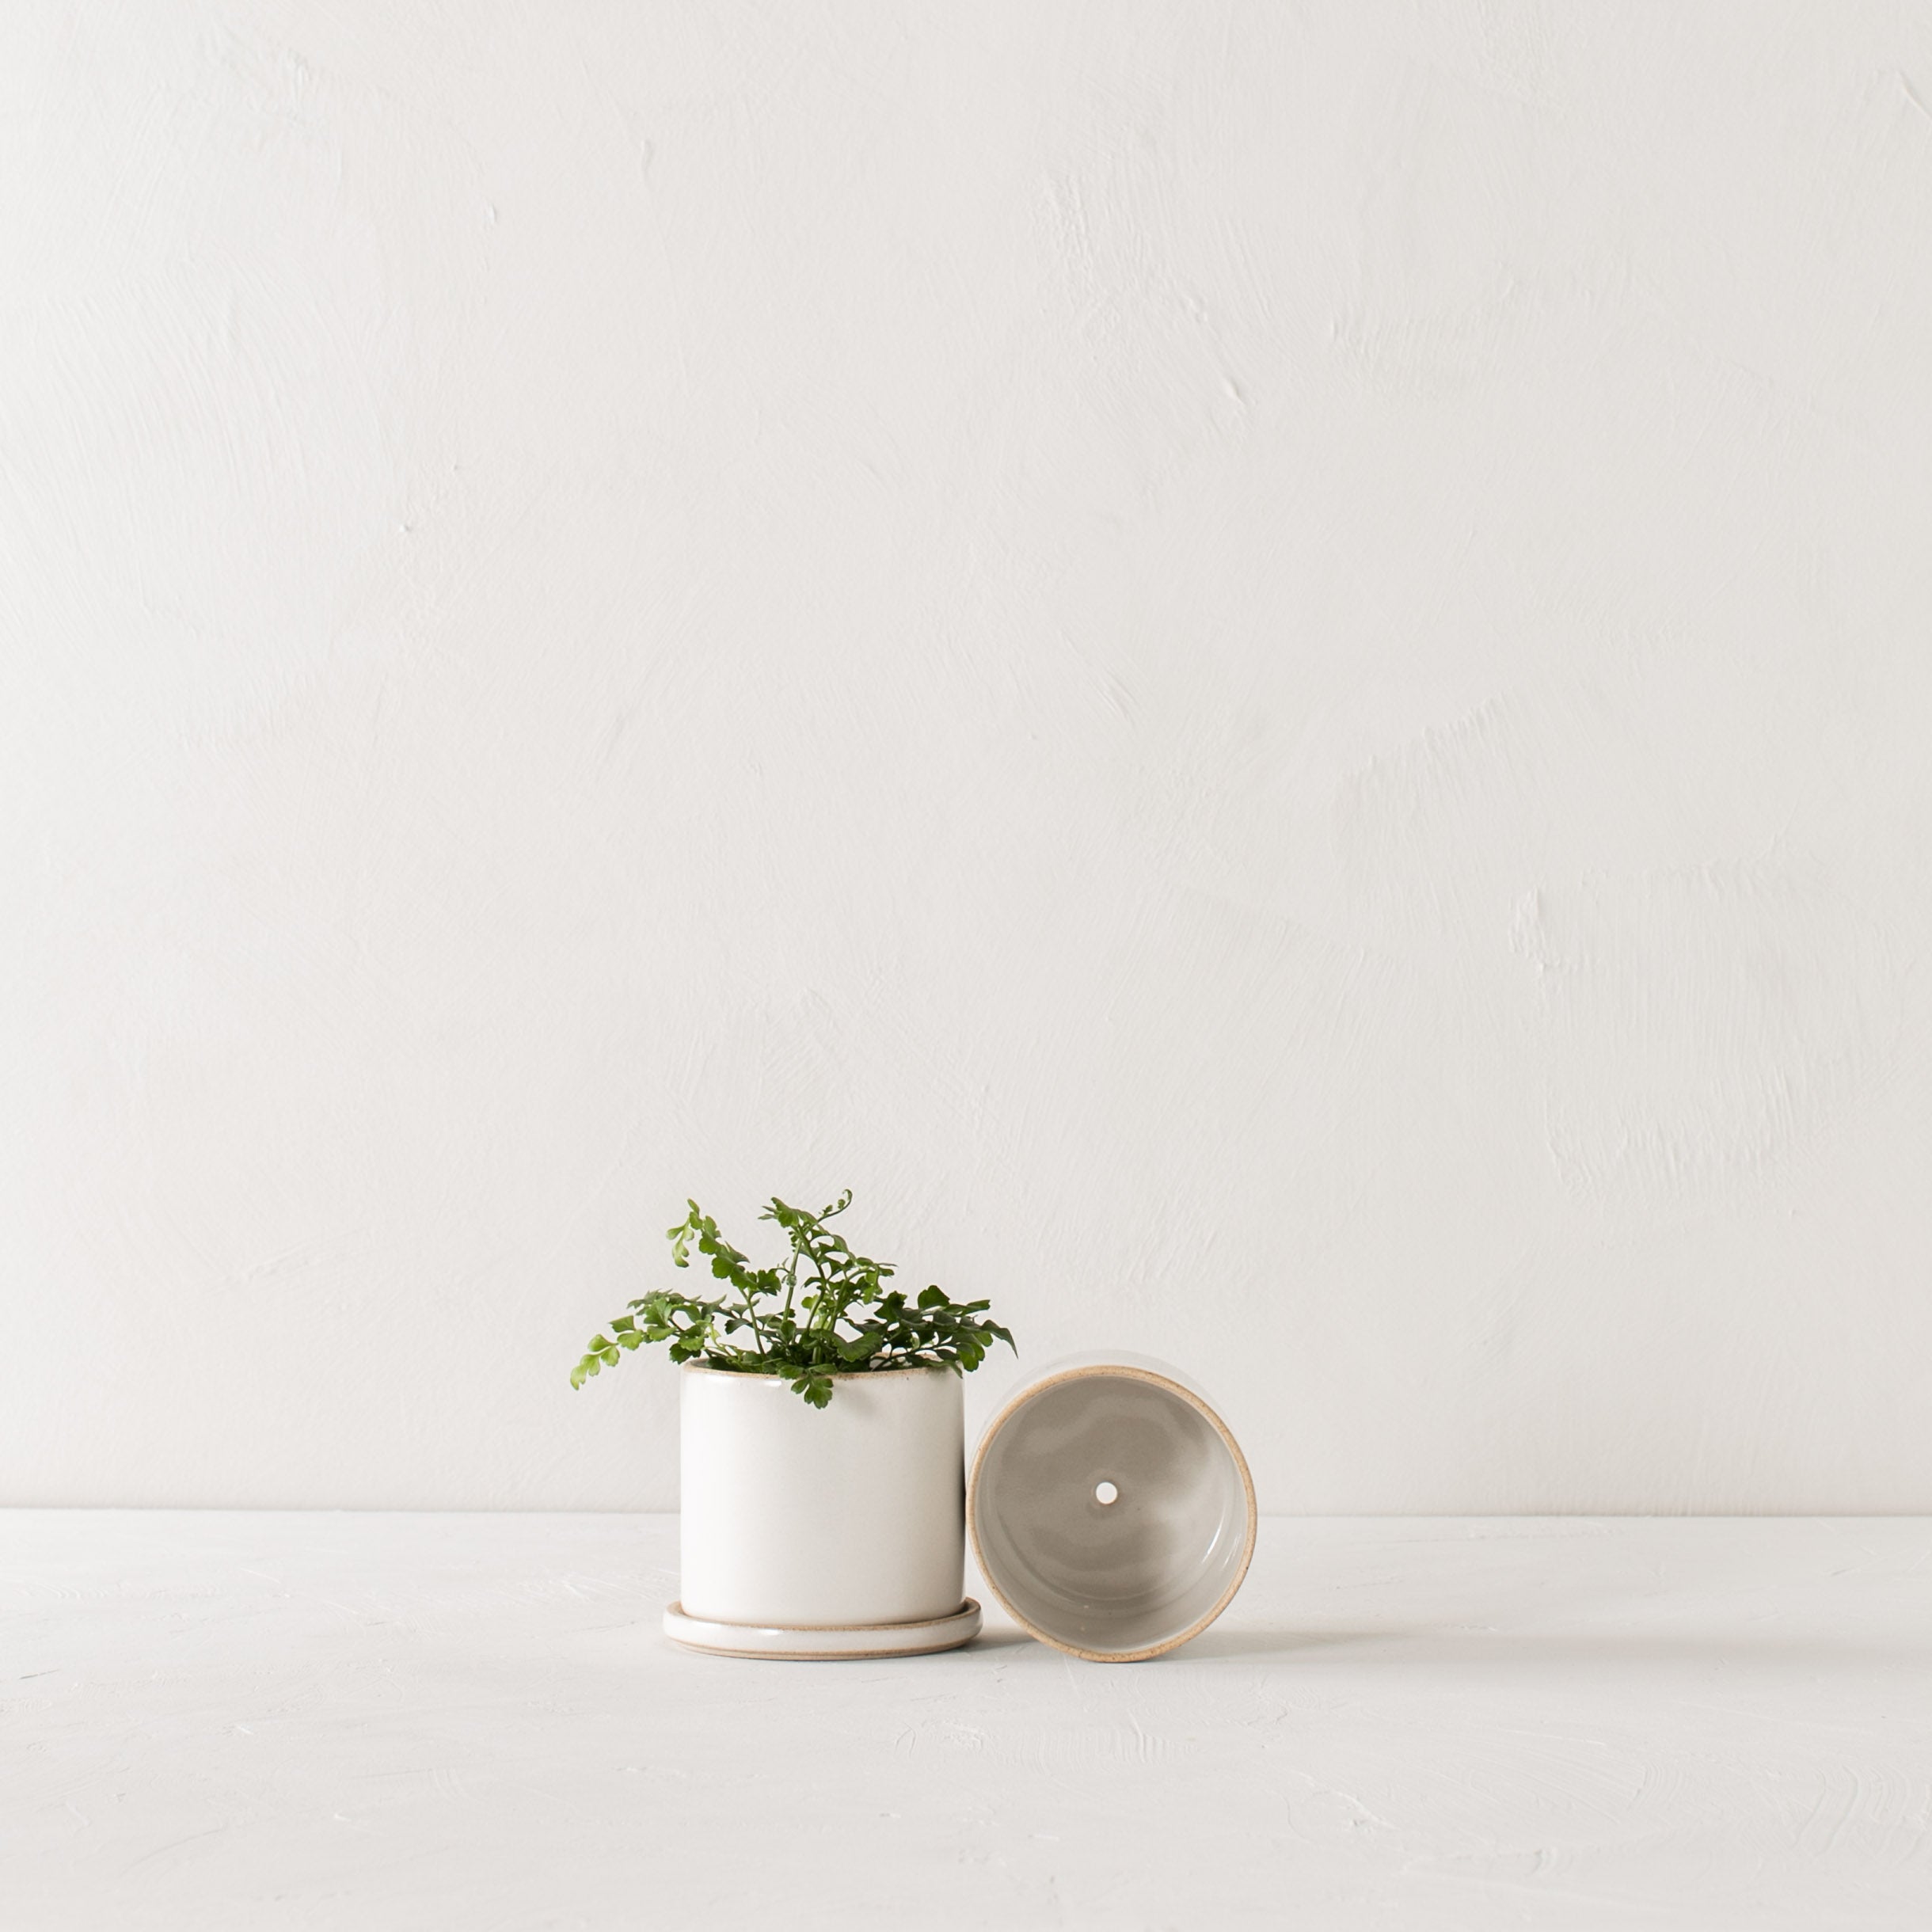 Two minimal white ceramic planters side by side. 4 inch planter and bottom dish stood upright, the other laying on its side to show off the drainage hole. Handmade ceramic planter, designed by Convivial Production, sold by Shop Verdant, Kansas City, Mo plant store.